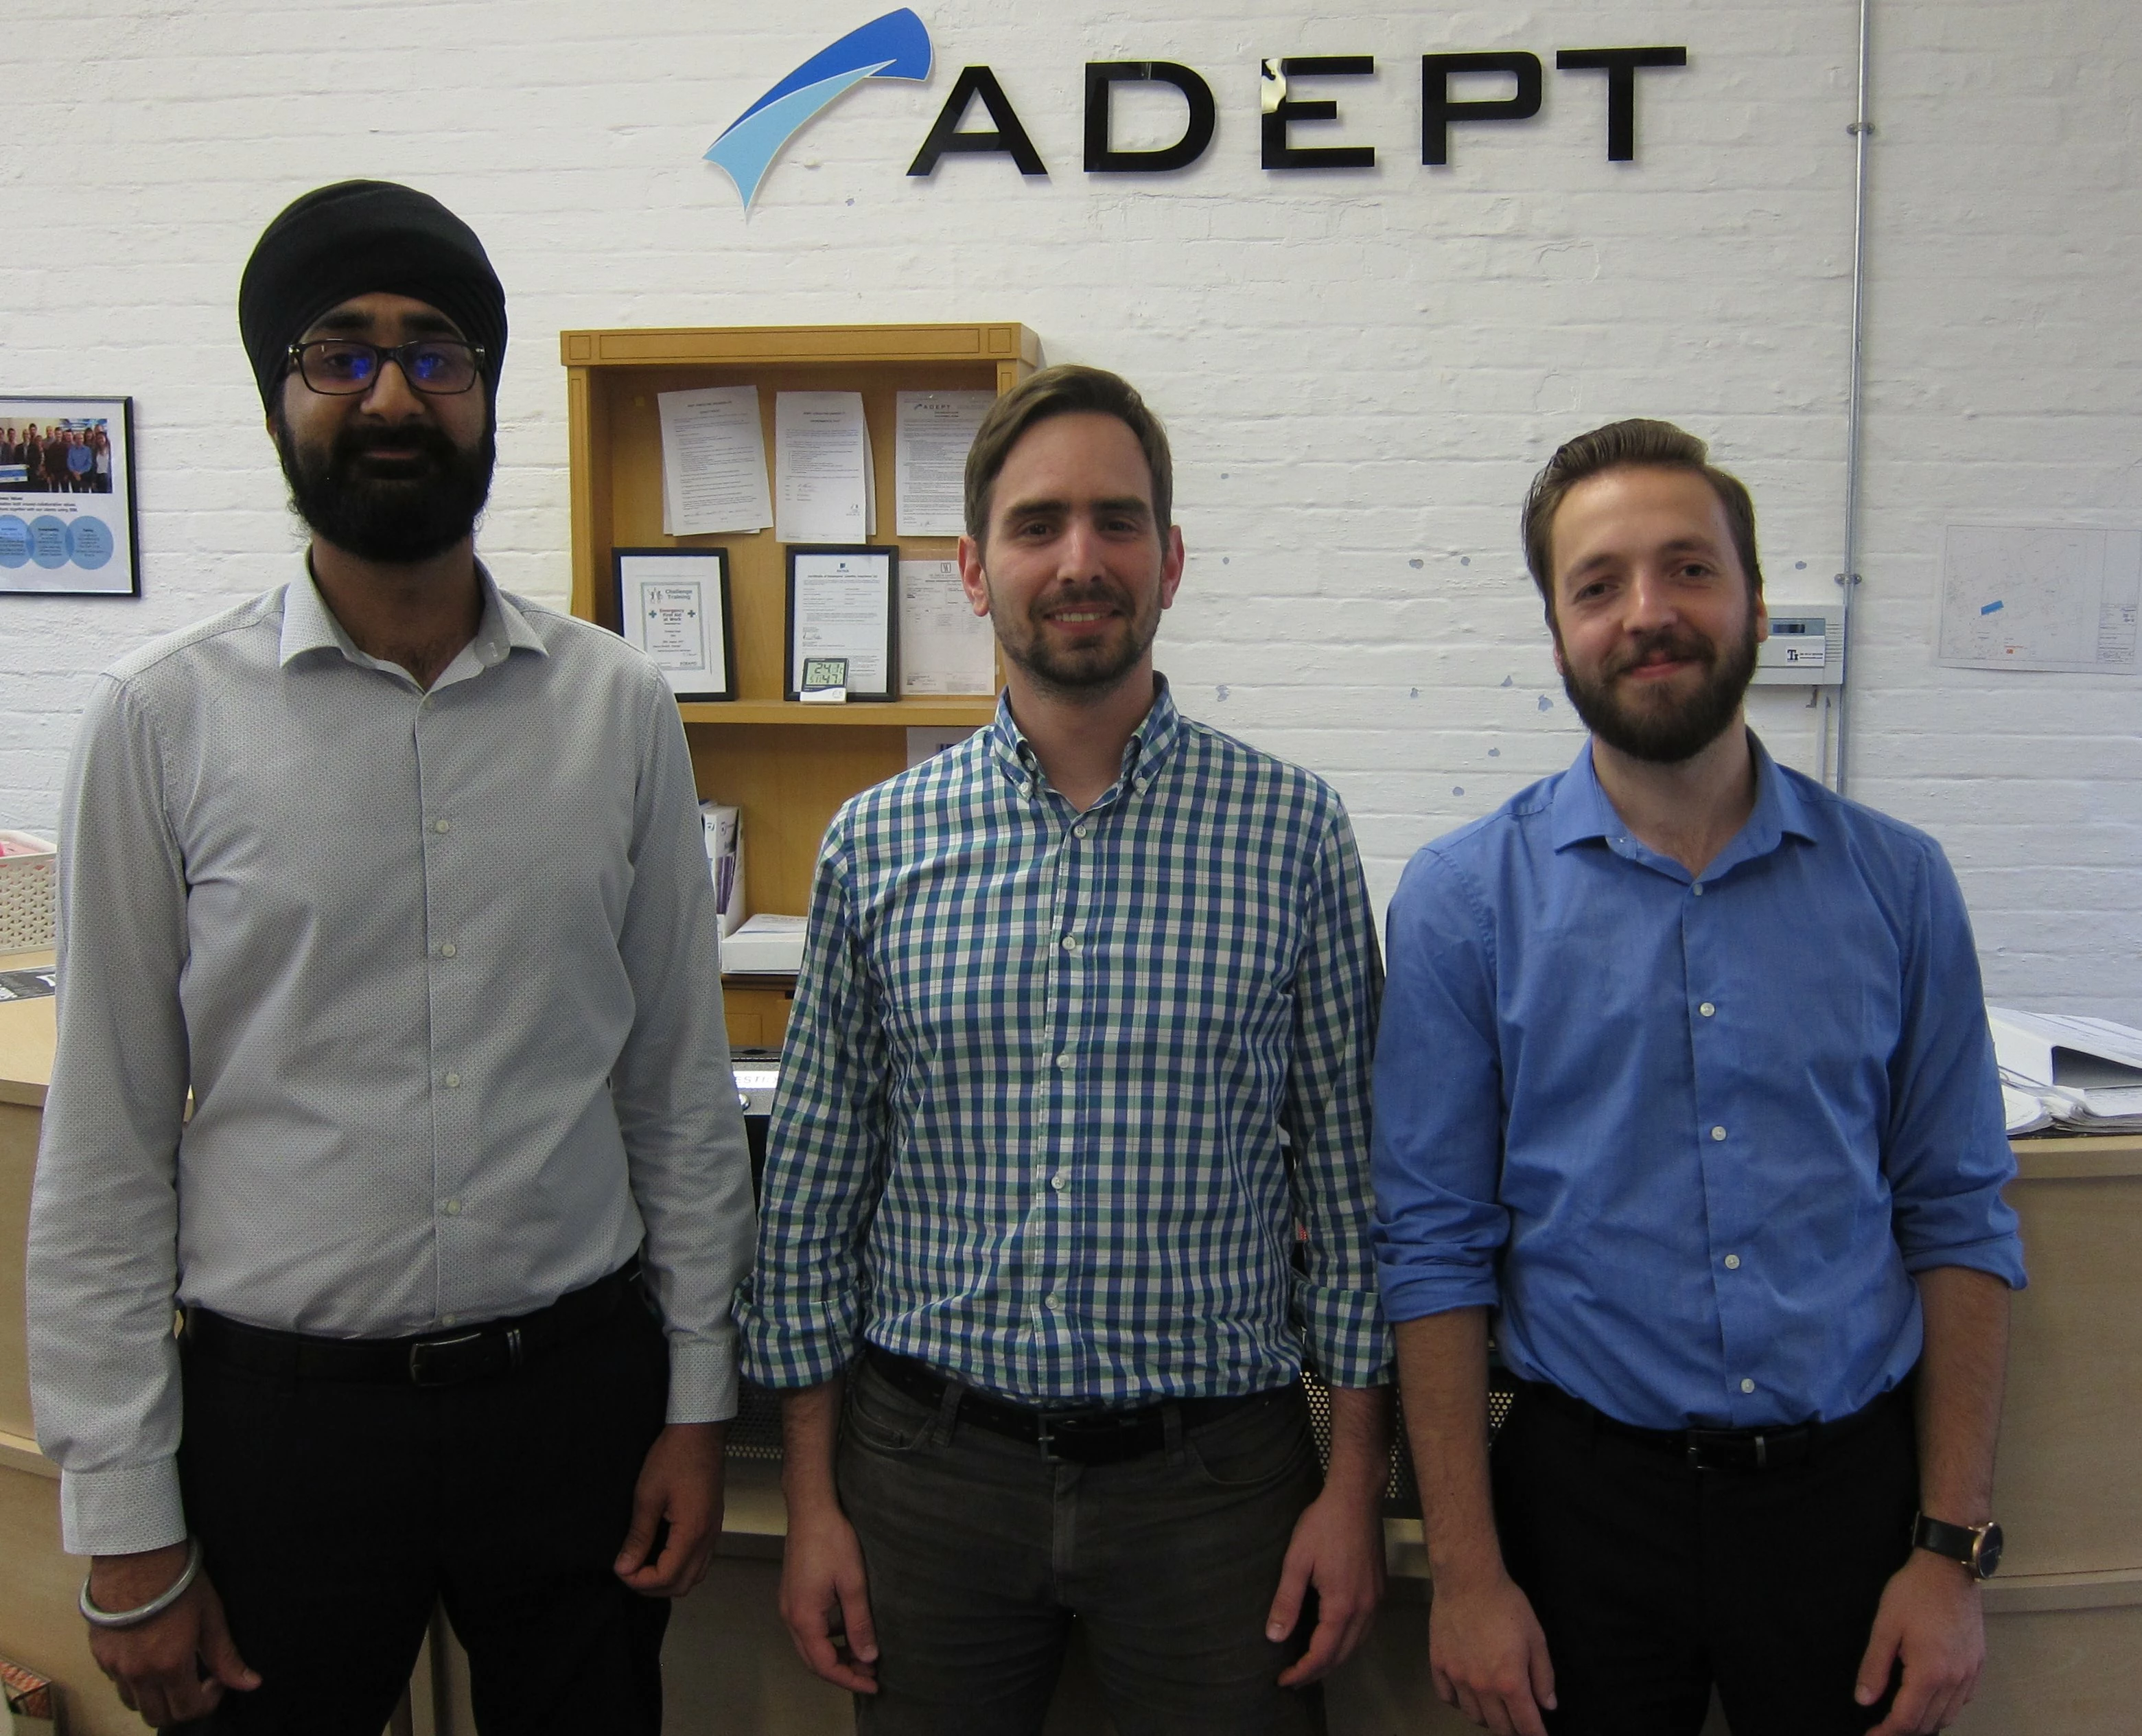 New starters at Adept, Amreet Notay, Pedro Goncalves and Jack Stokes